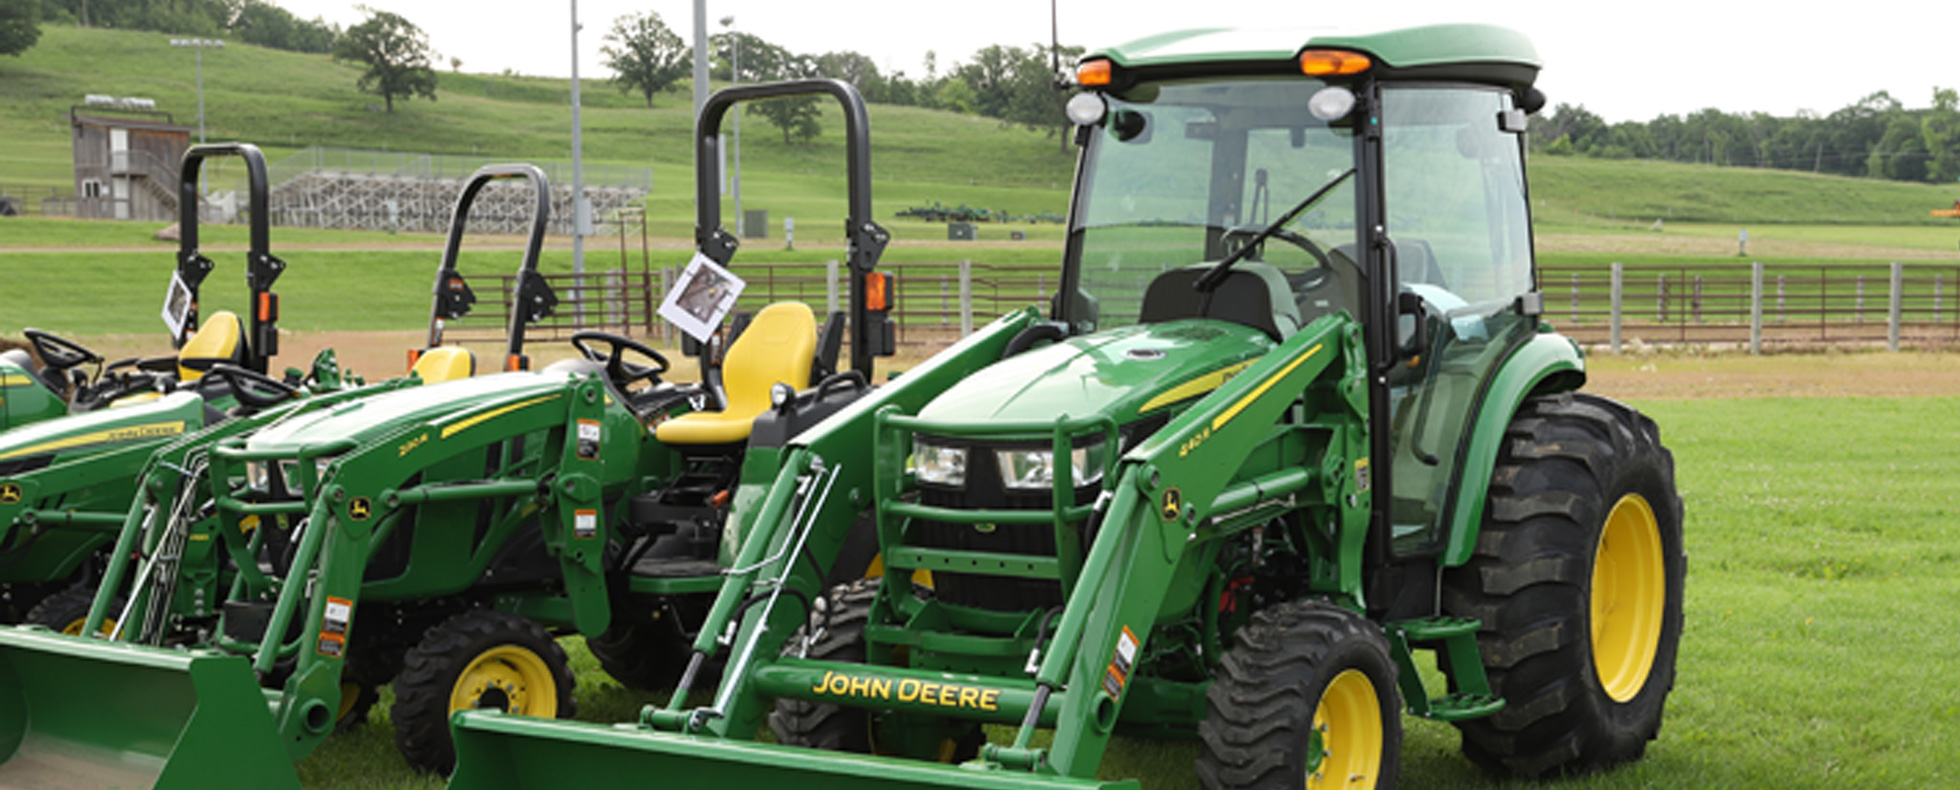 Enclosed Cab or Open Station – Which Tractor is Right for You?